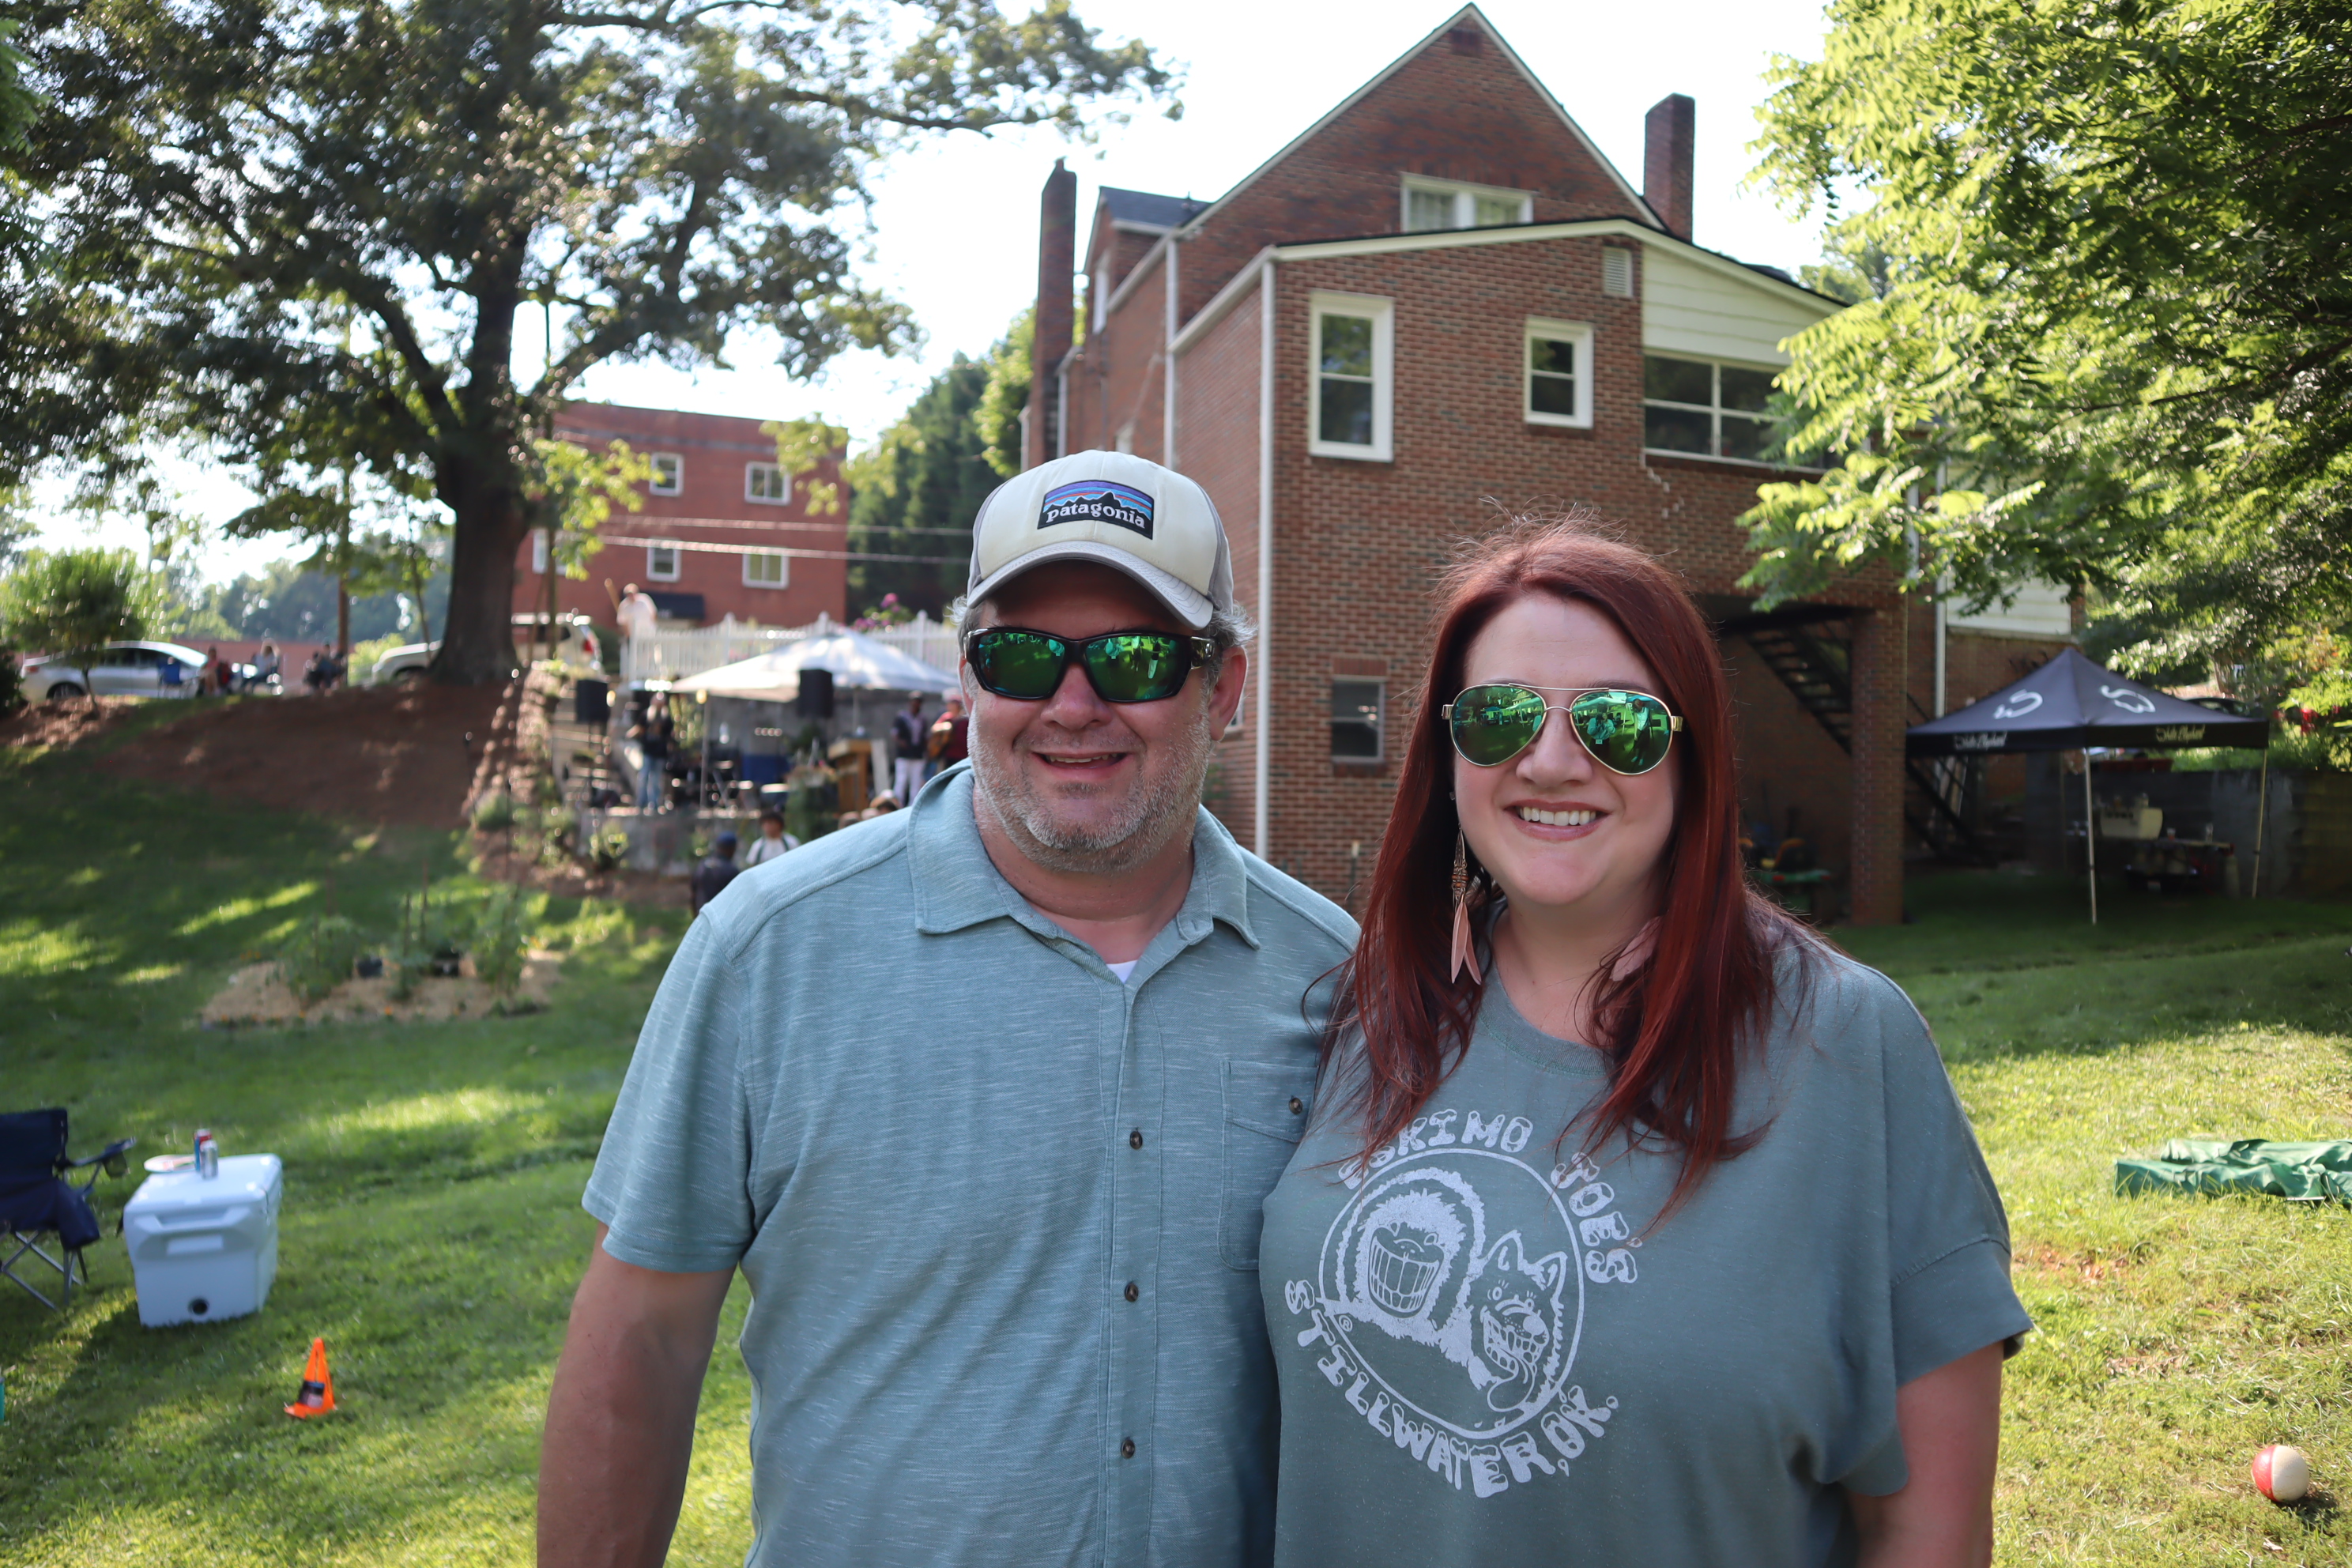 Melissa and Lee Parker, neighbors who co-hosted the music fundraiser for MCC.